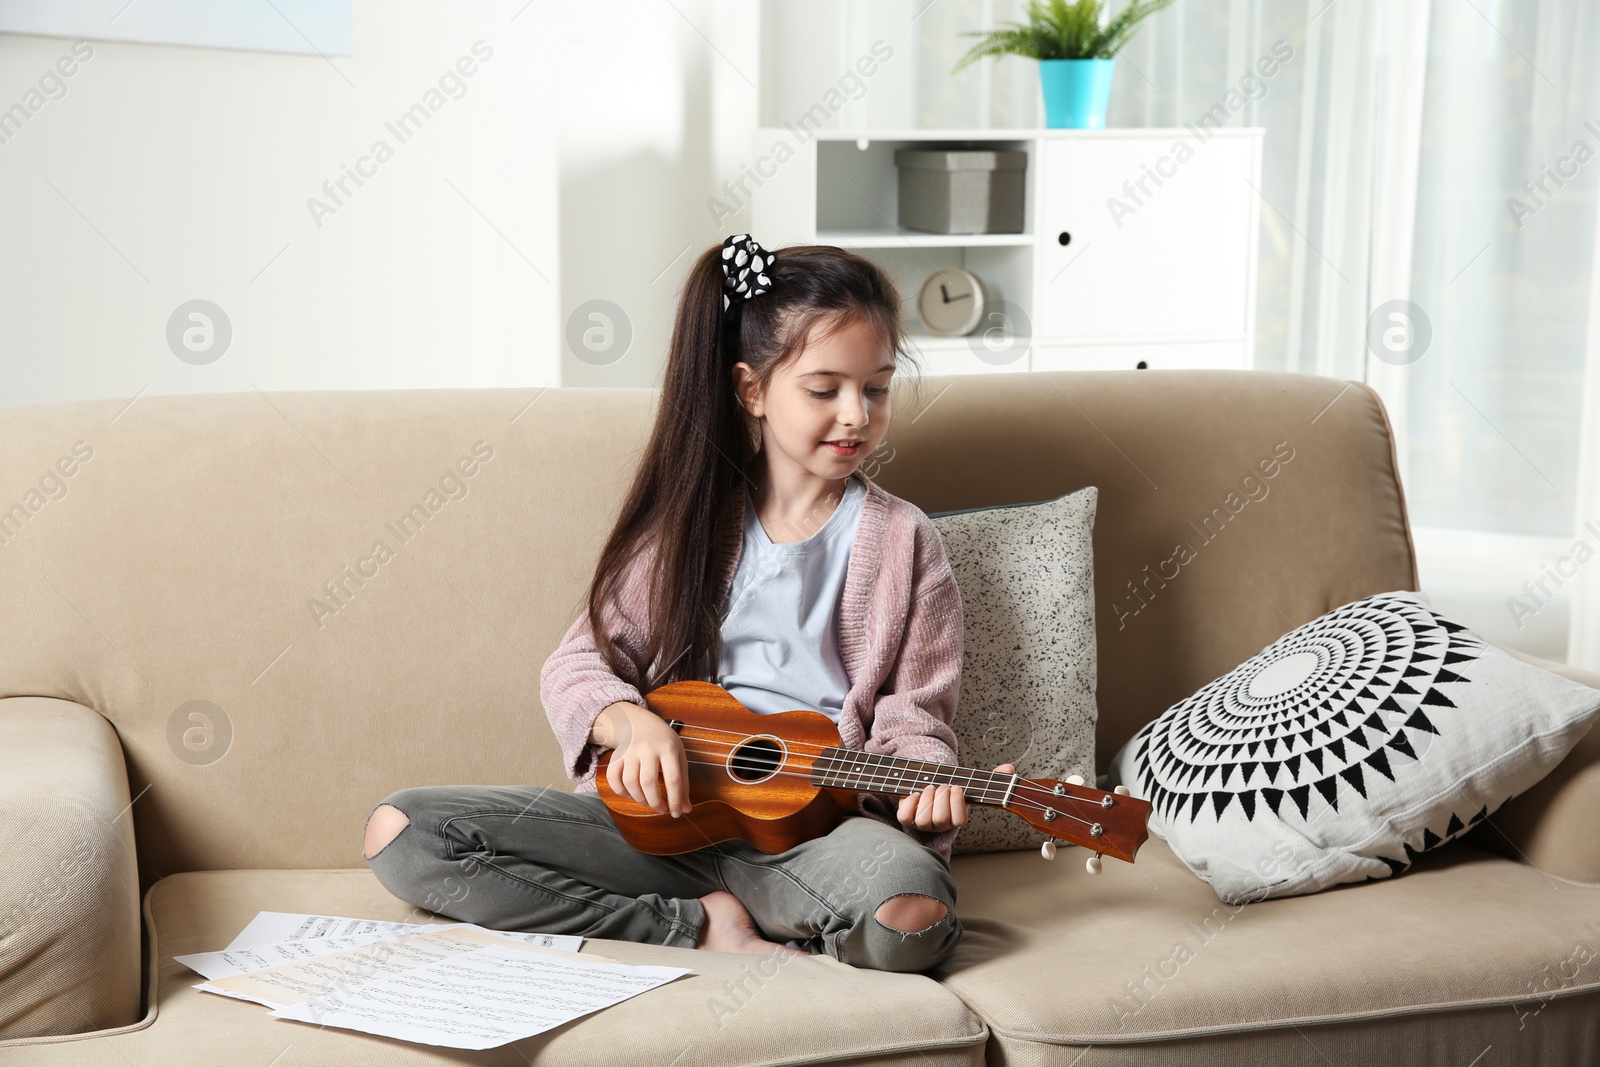 Photo of Cute little girl playing guitar on sofa in room